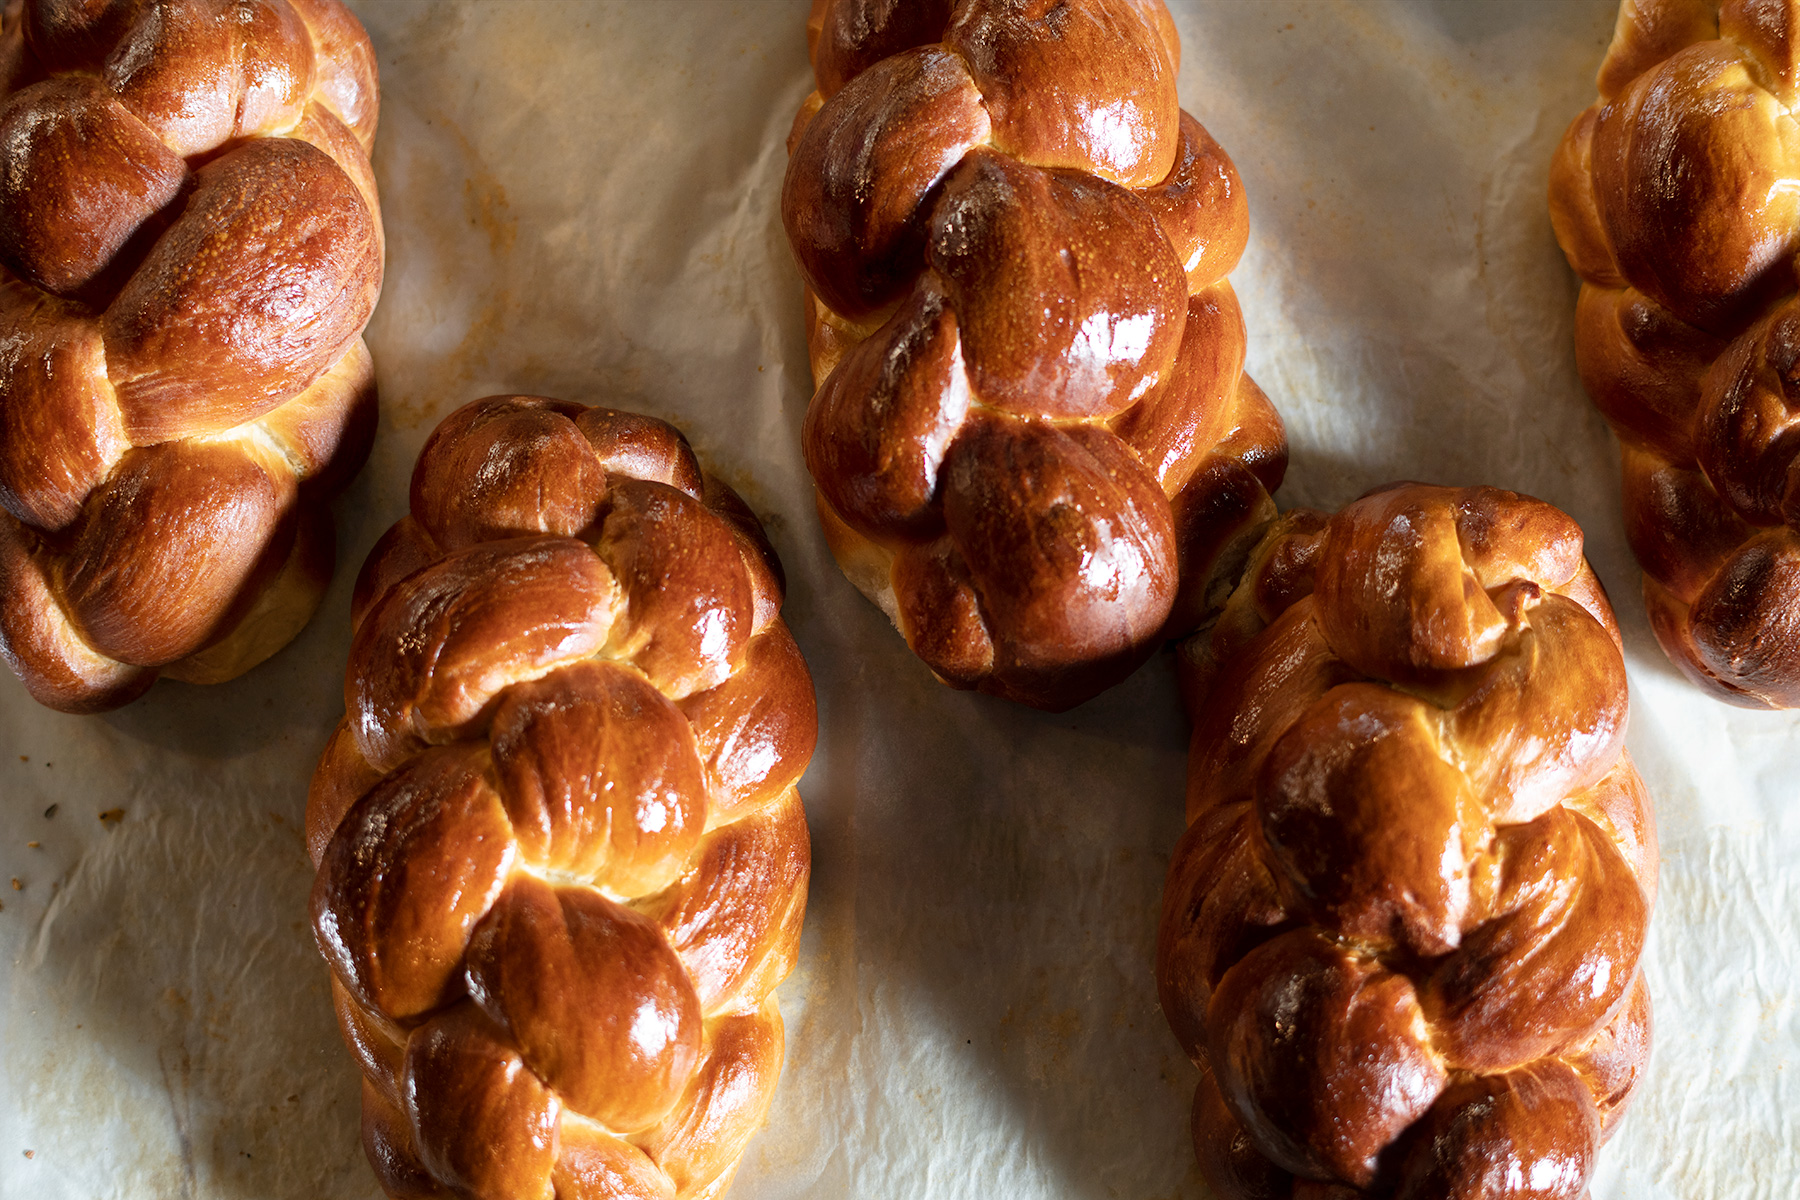 Challah Braids from The Market Local Comfort Cafe